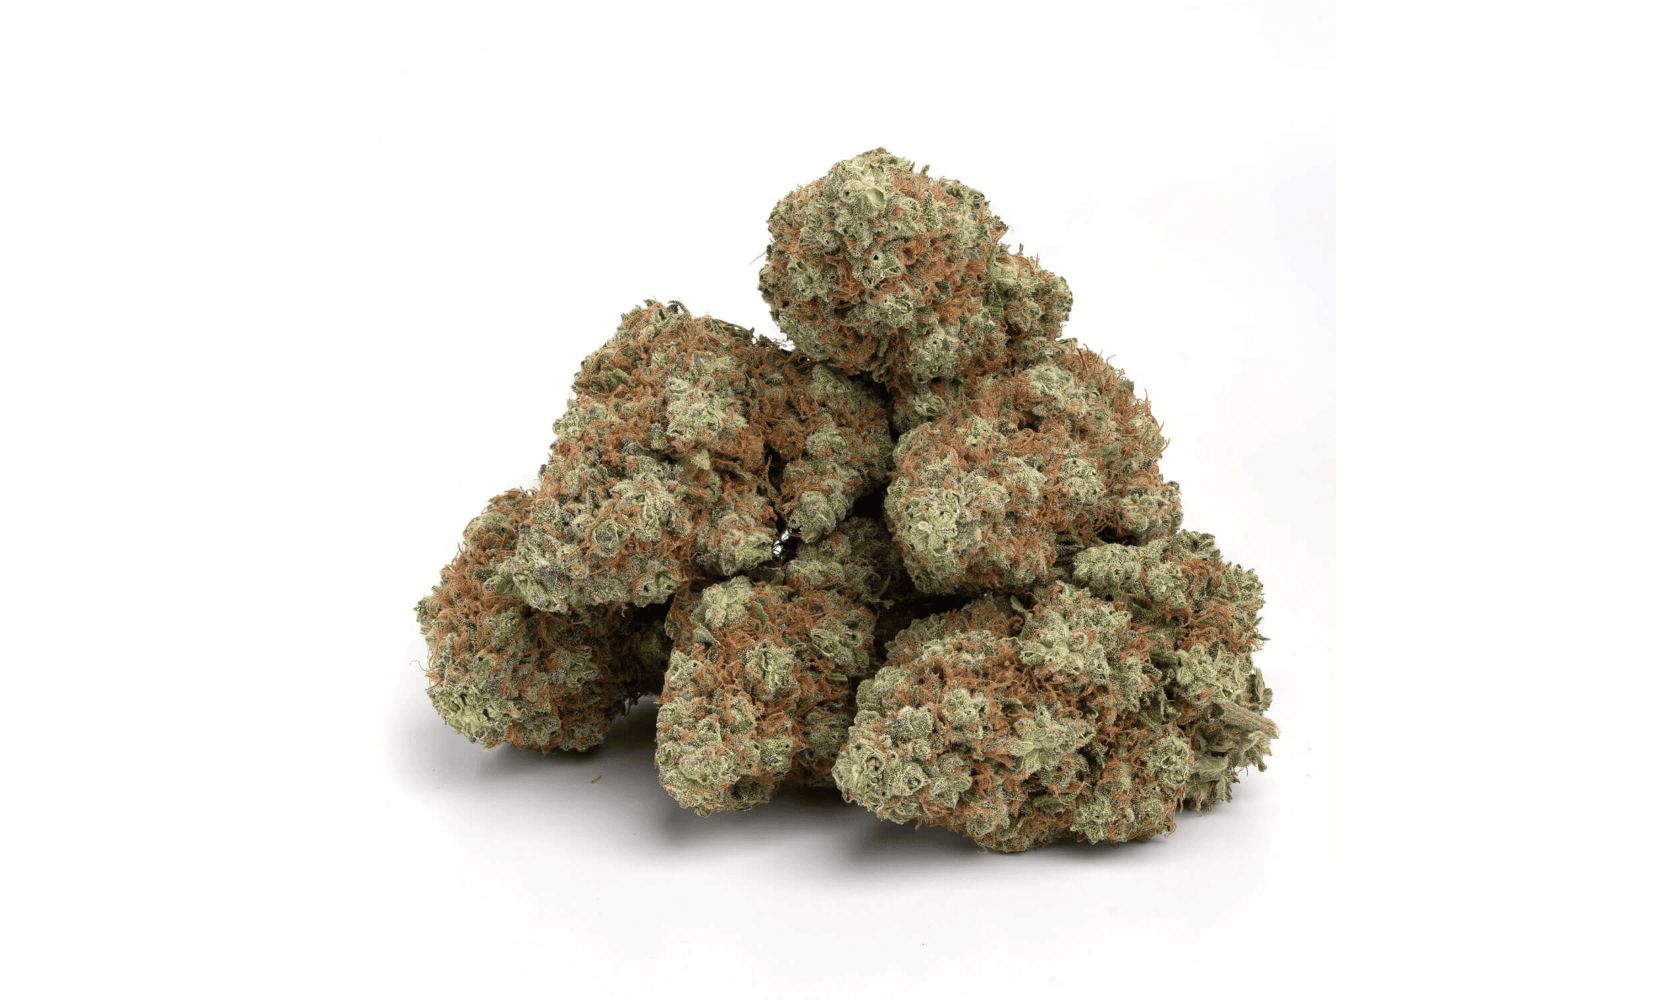 Chemdawg is not only a name in the cannabis industry but also a Hall of Fame. Find out more about the Chemdawg strain in this blog & order today.